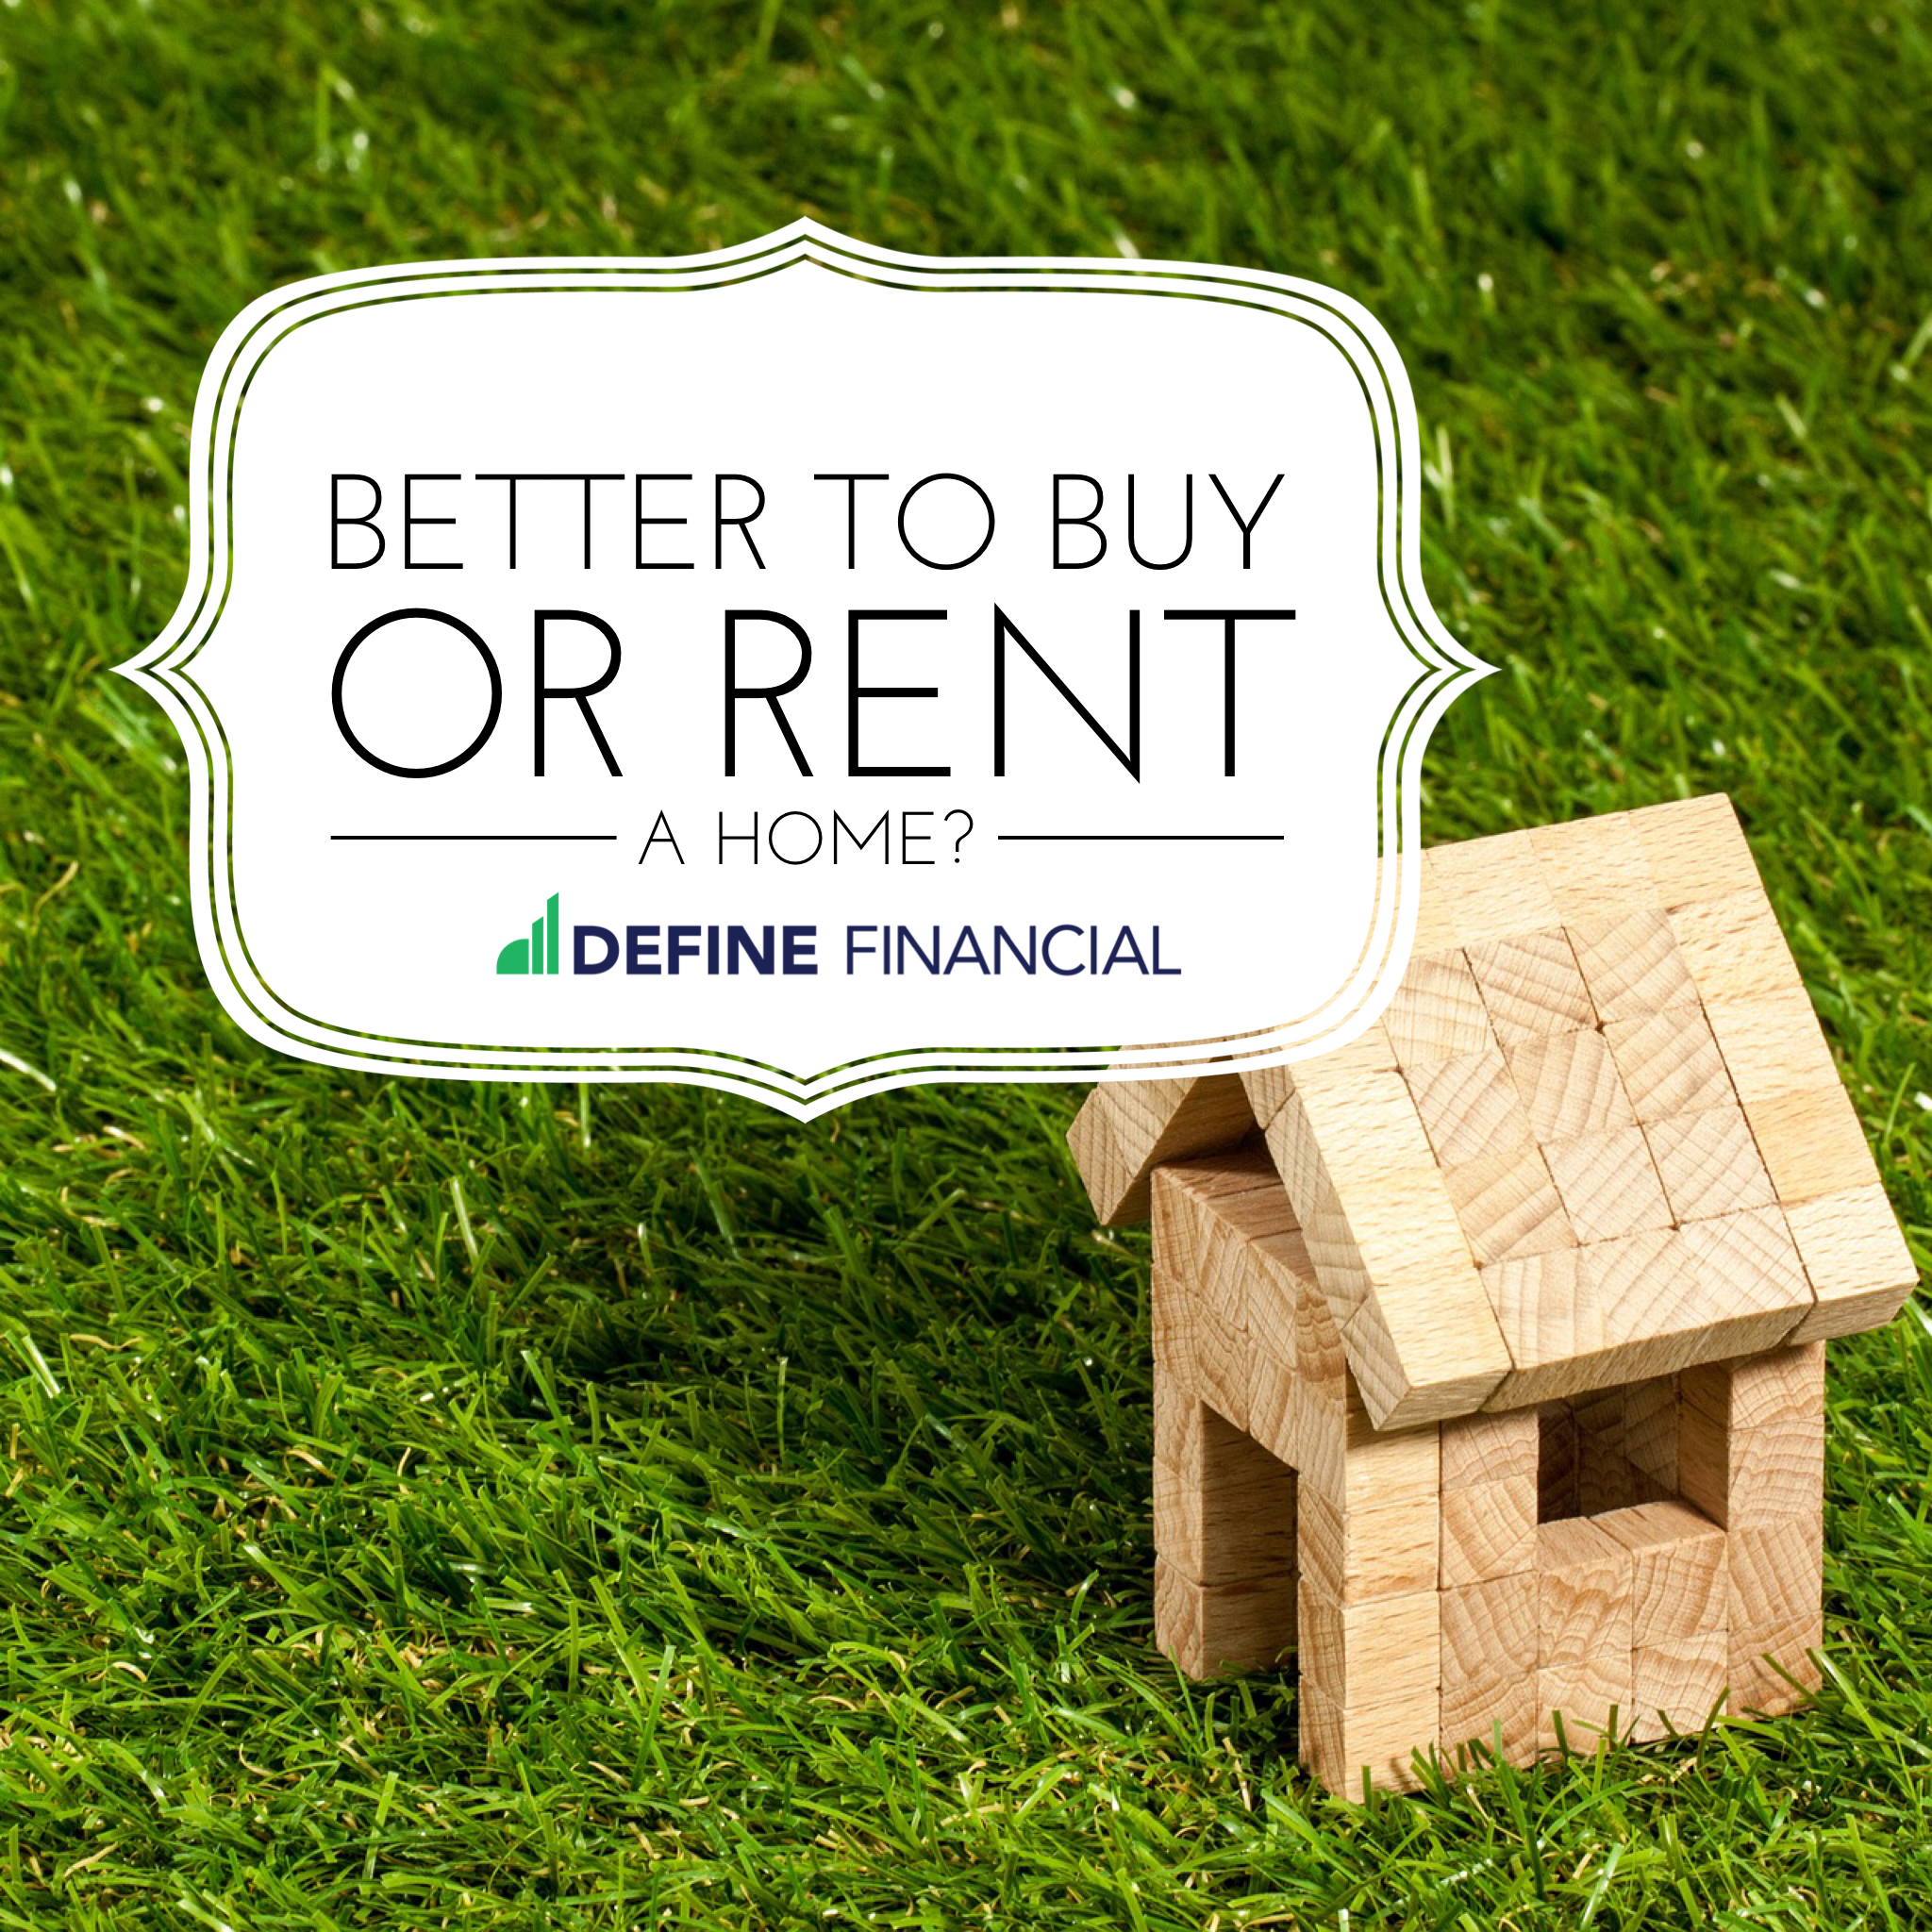 San Diego Real Estate: Better to Buy or Rent?